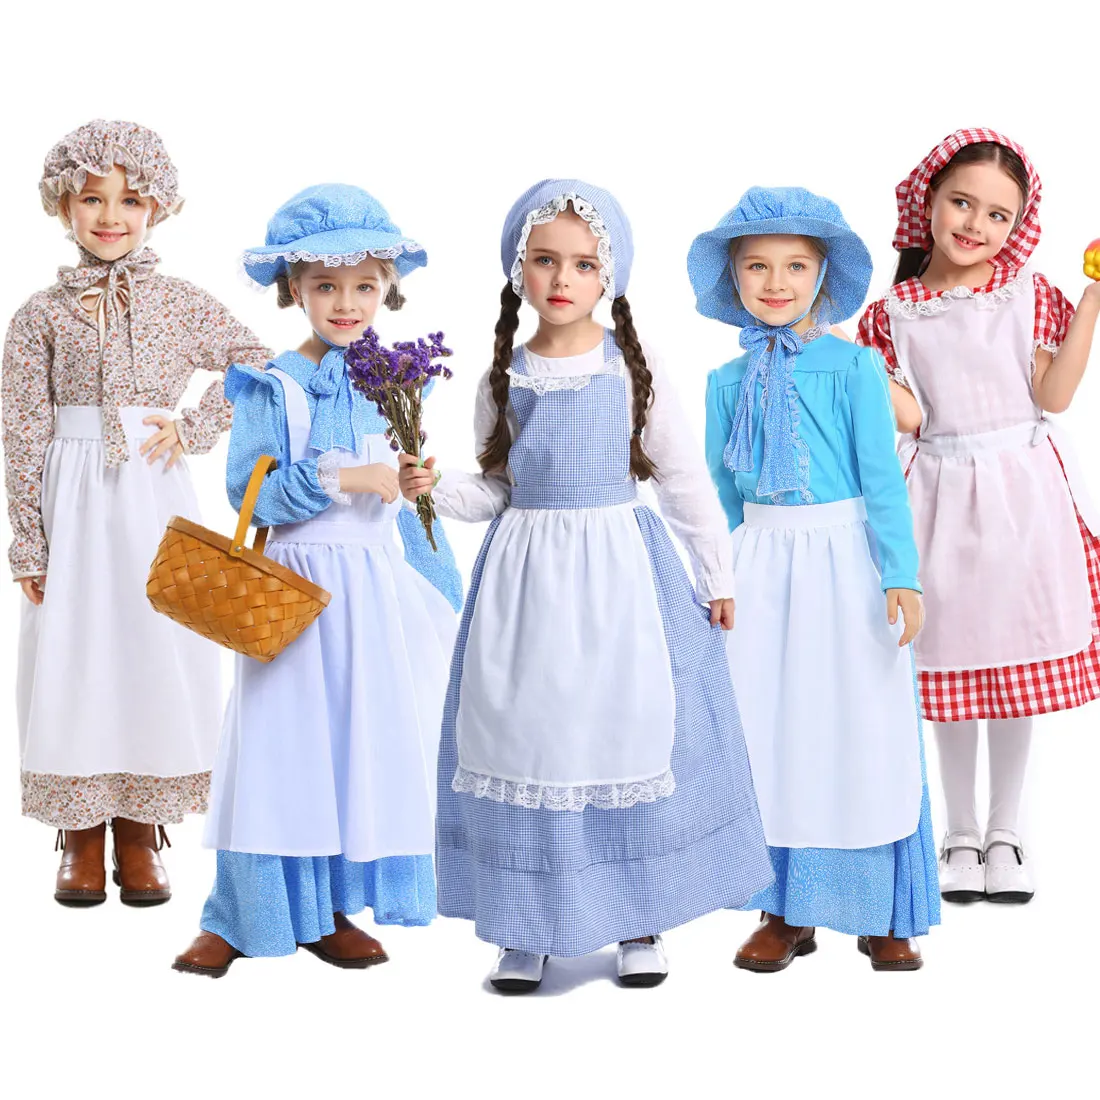 

Umorden Lovely Early America Colonial Village Pioneer Girl Costume Halloween Costumes Fancy Dress for Child Kids Teen Girls